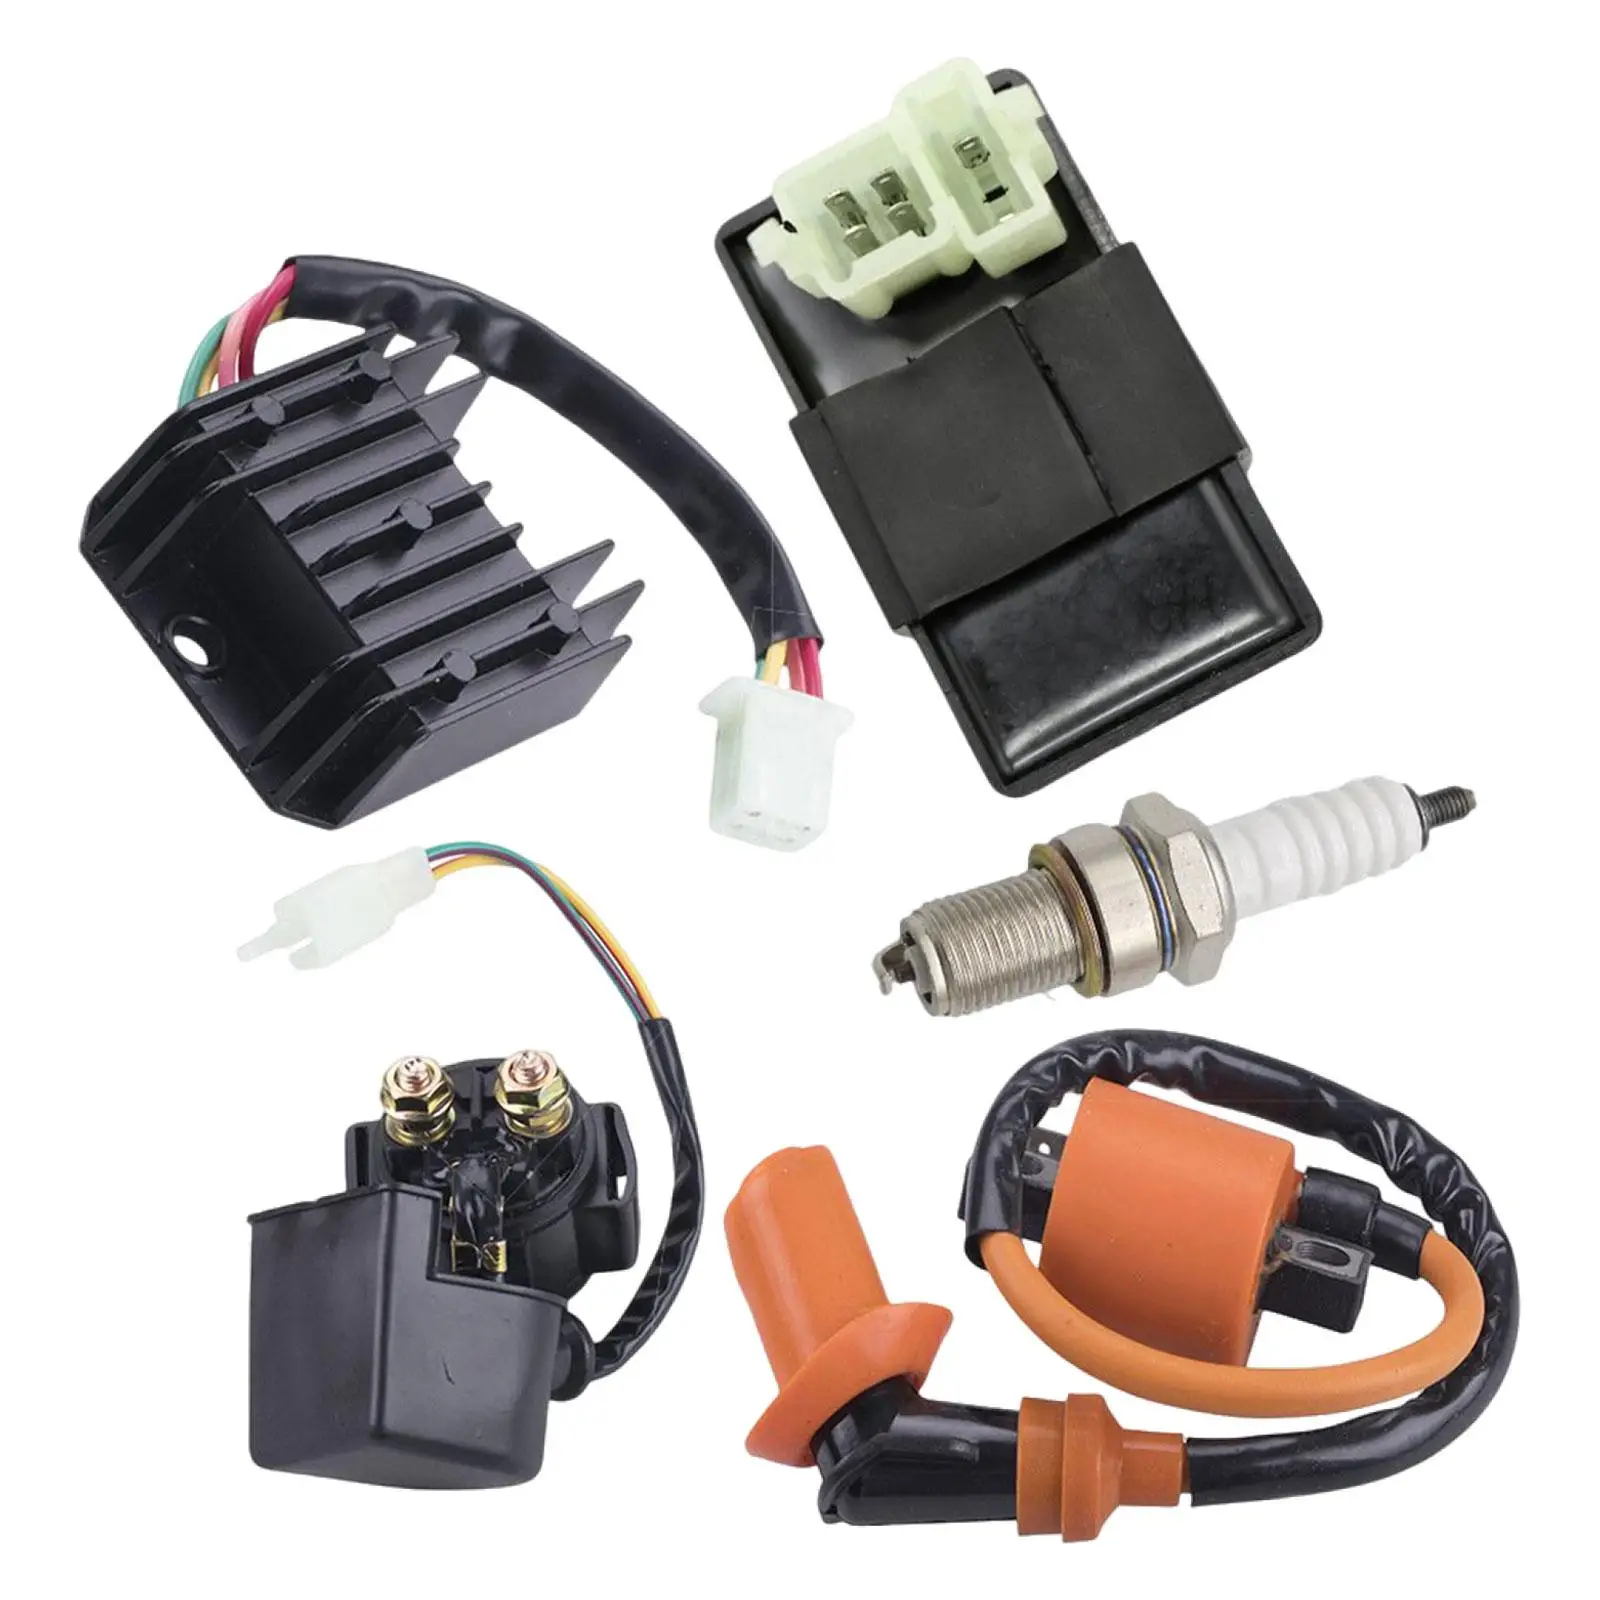 Ignition Coil Solenoid Relay Rectifier Cdi Box for 125cc 150cc 200cc ATV Dirt Bikes Mopeds Quad Pit Bikes Replacement Parts